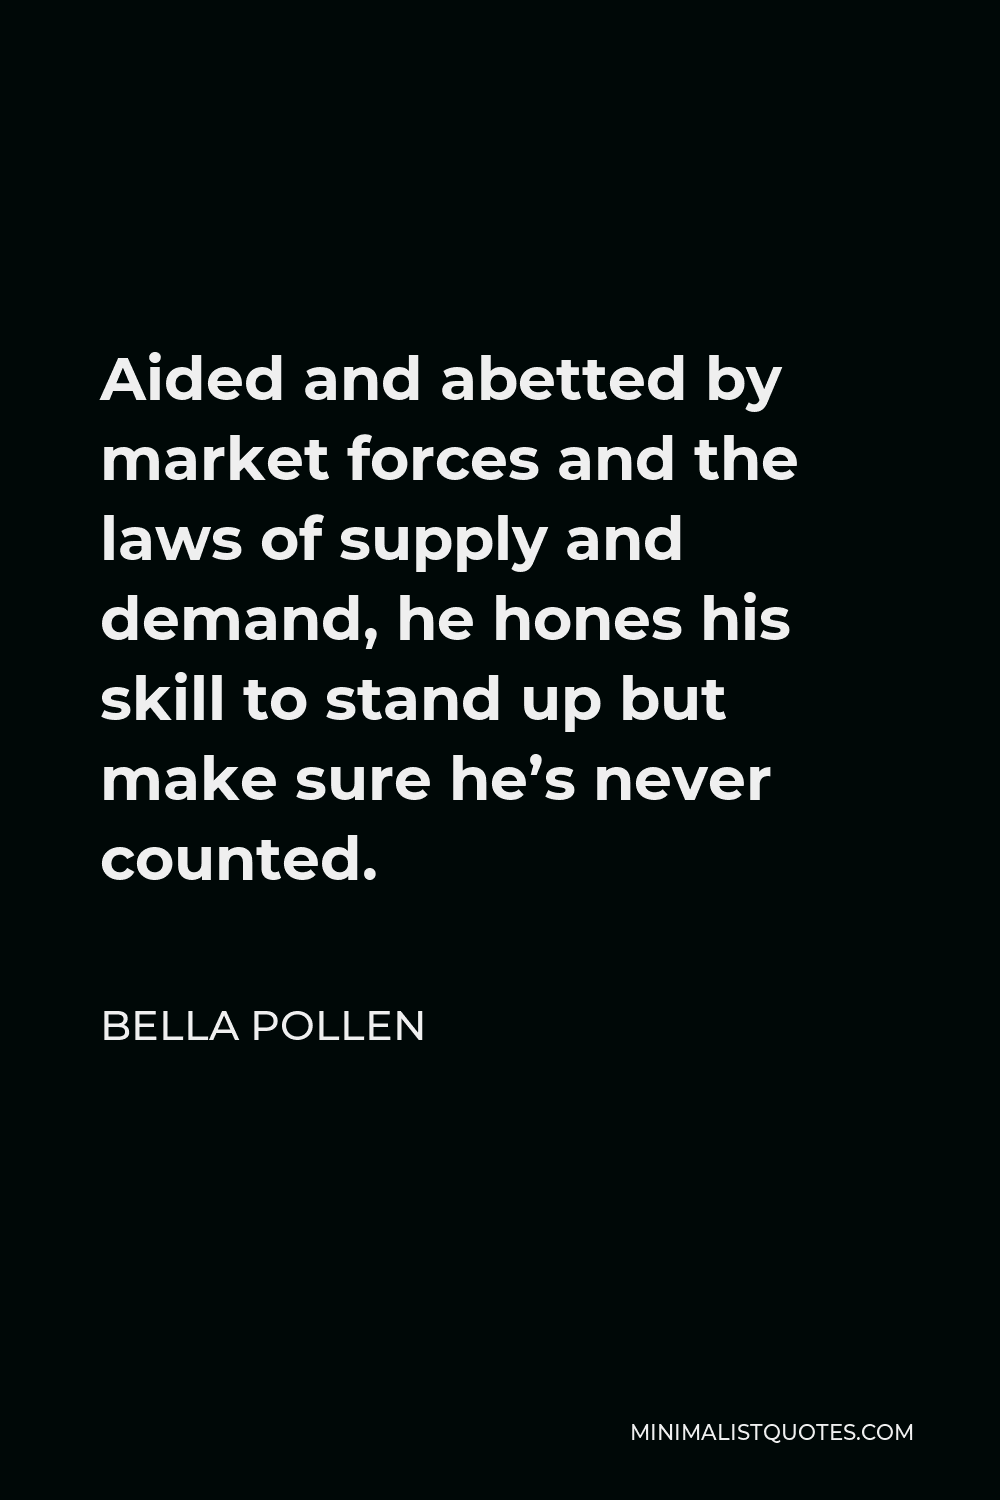 Bella Pollen Quote - Aided and abetted by market forces and the laws of supply and demand, he hones his skill to stand up but make sure he’s never counted.